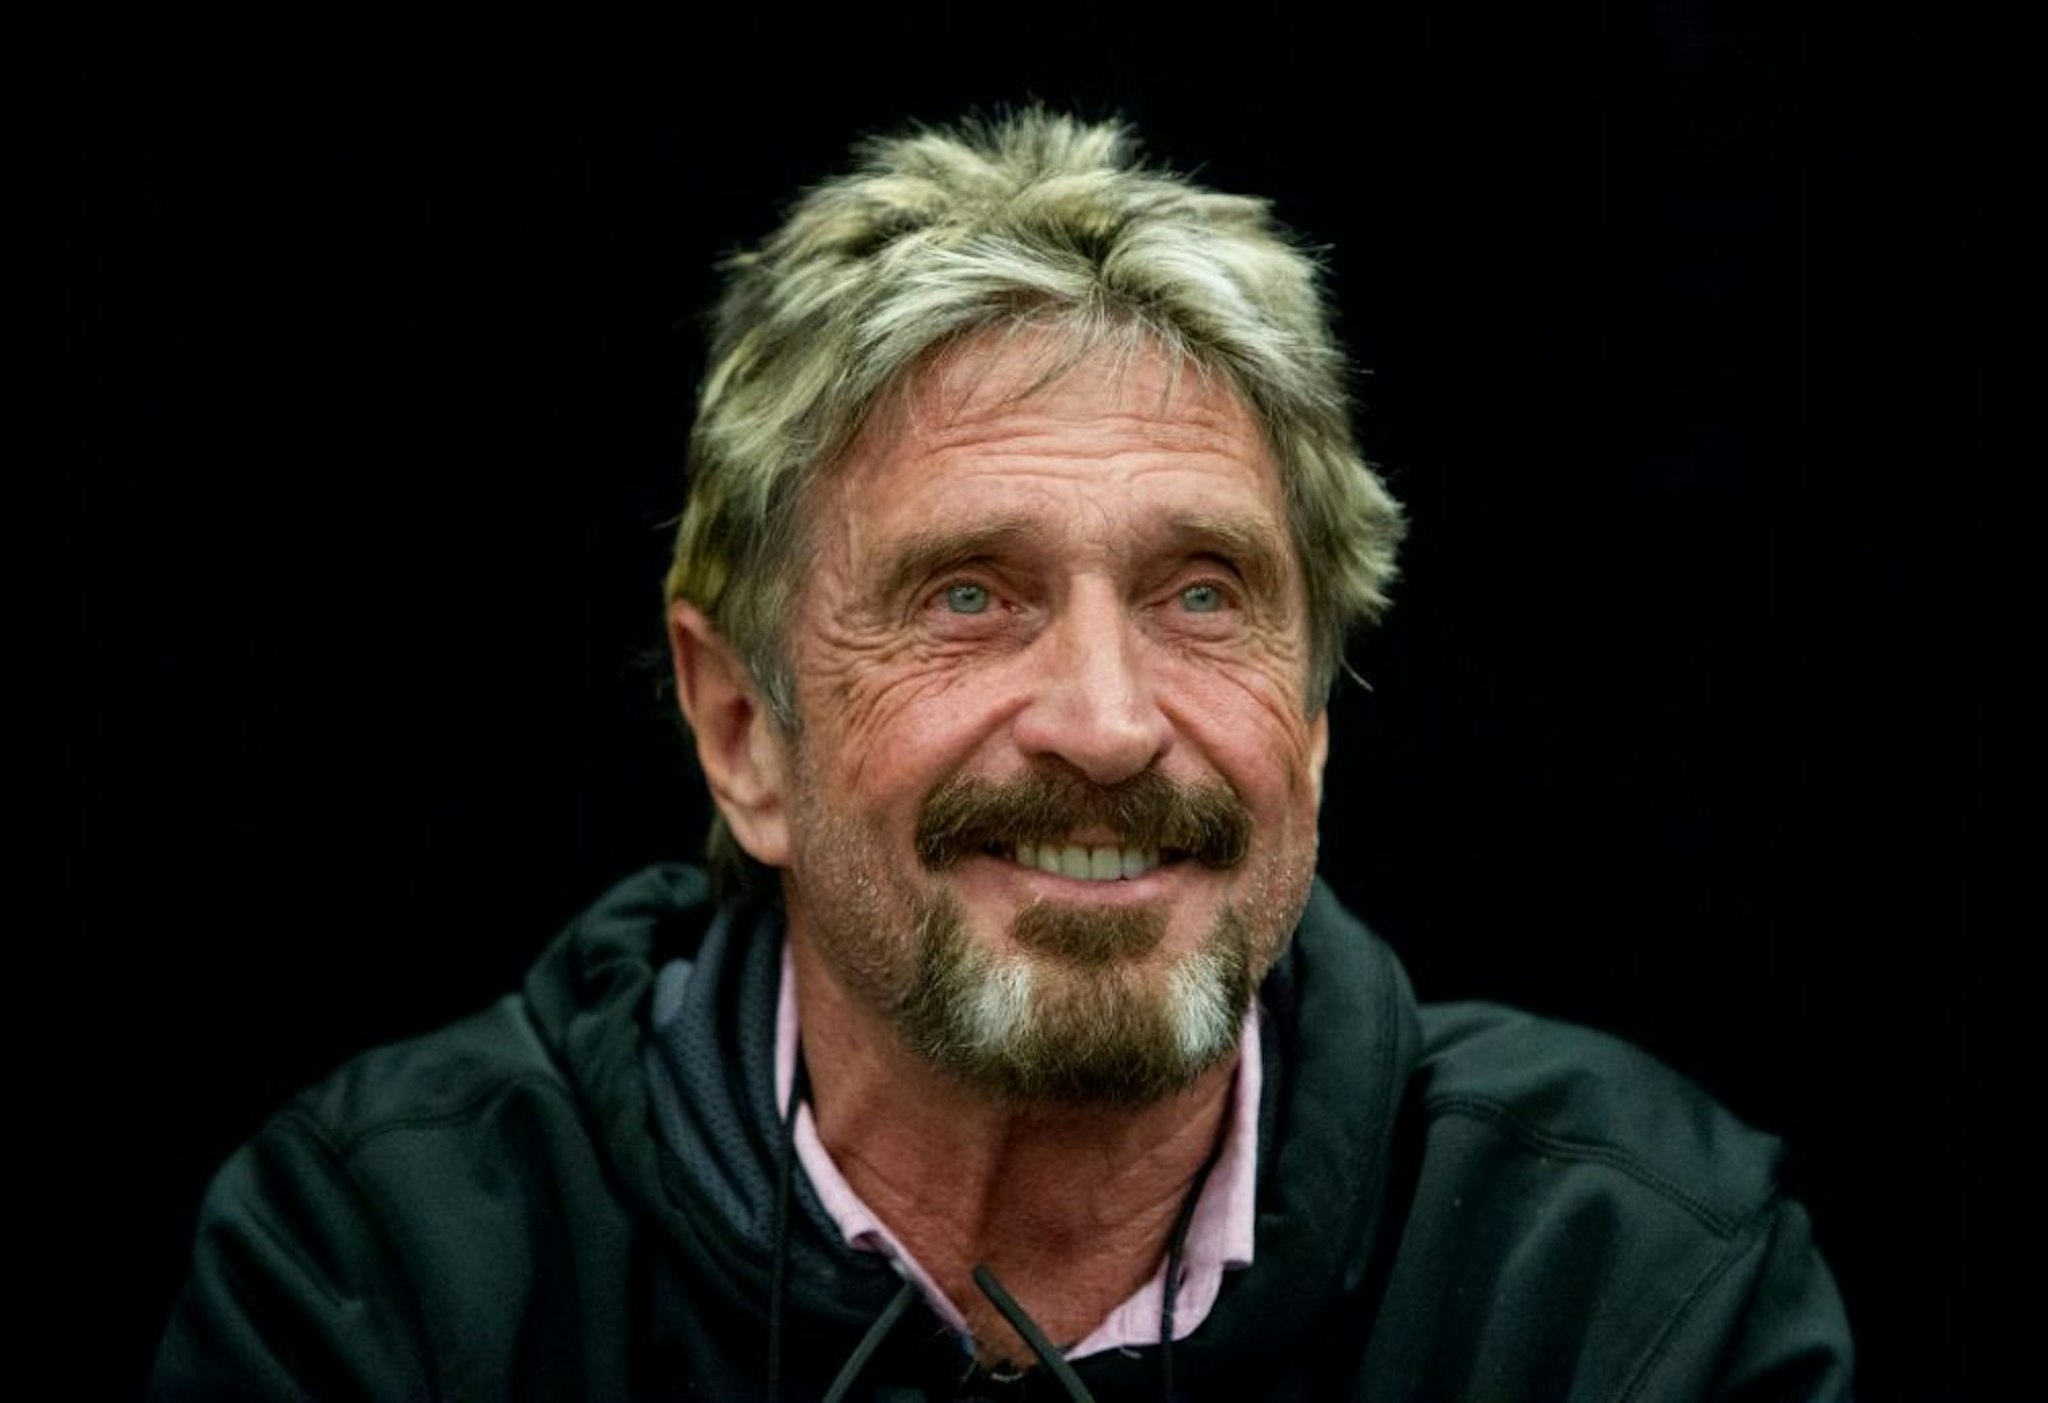 SAN JOSE, CALIFORNIA - SEPTEMBER 28: John McAfee reacts to a question at the "Fireside Chat with John McAfee" talk during the C2SV Technology Conference + Music Festival at the McEnery Convention Center in San Jose, Calif., on Saturday, Sept. 28, 2013.